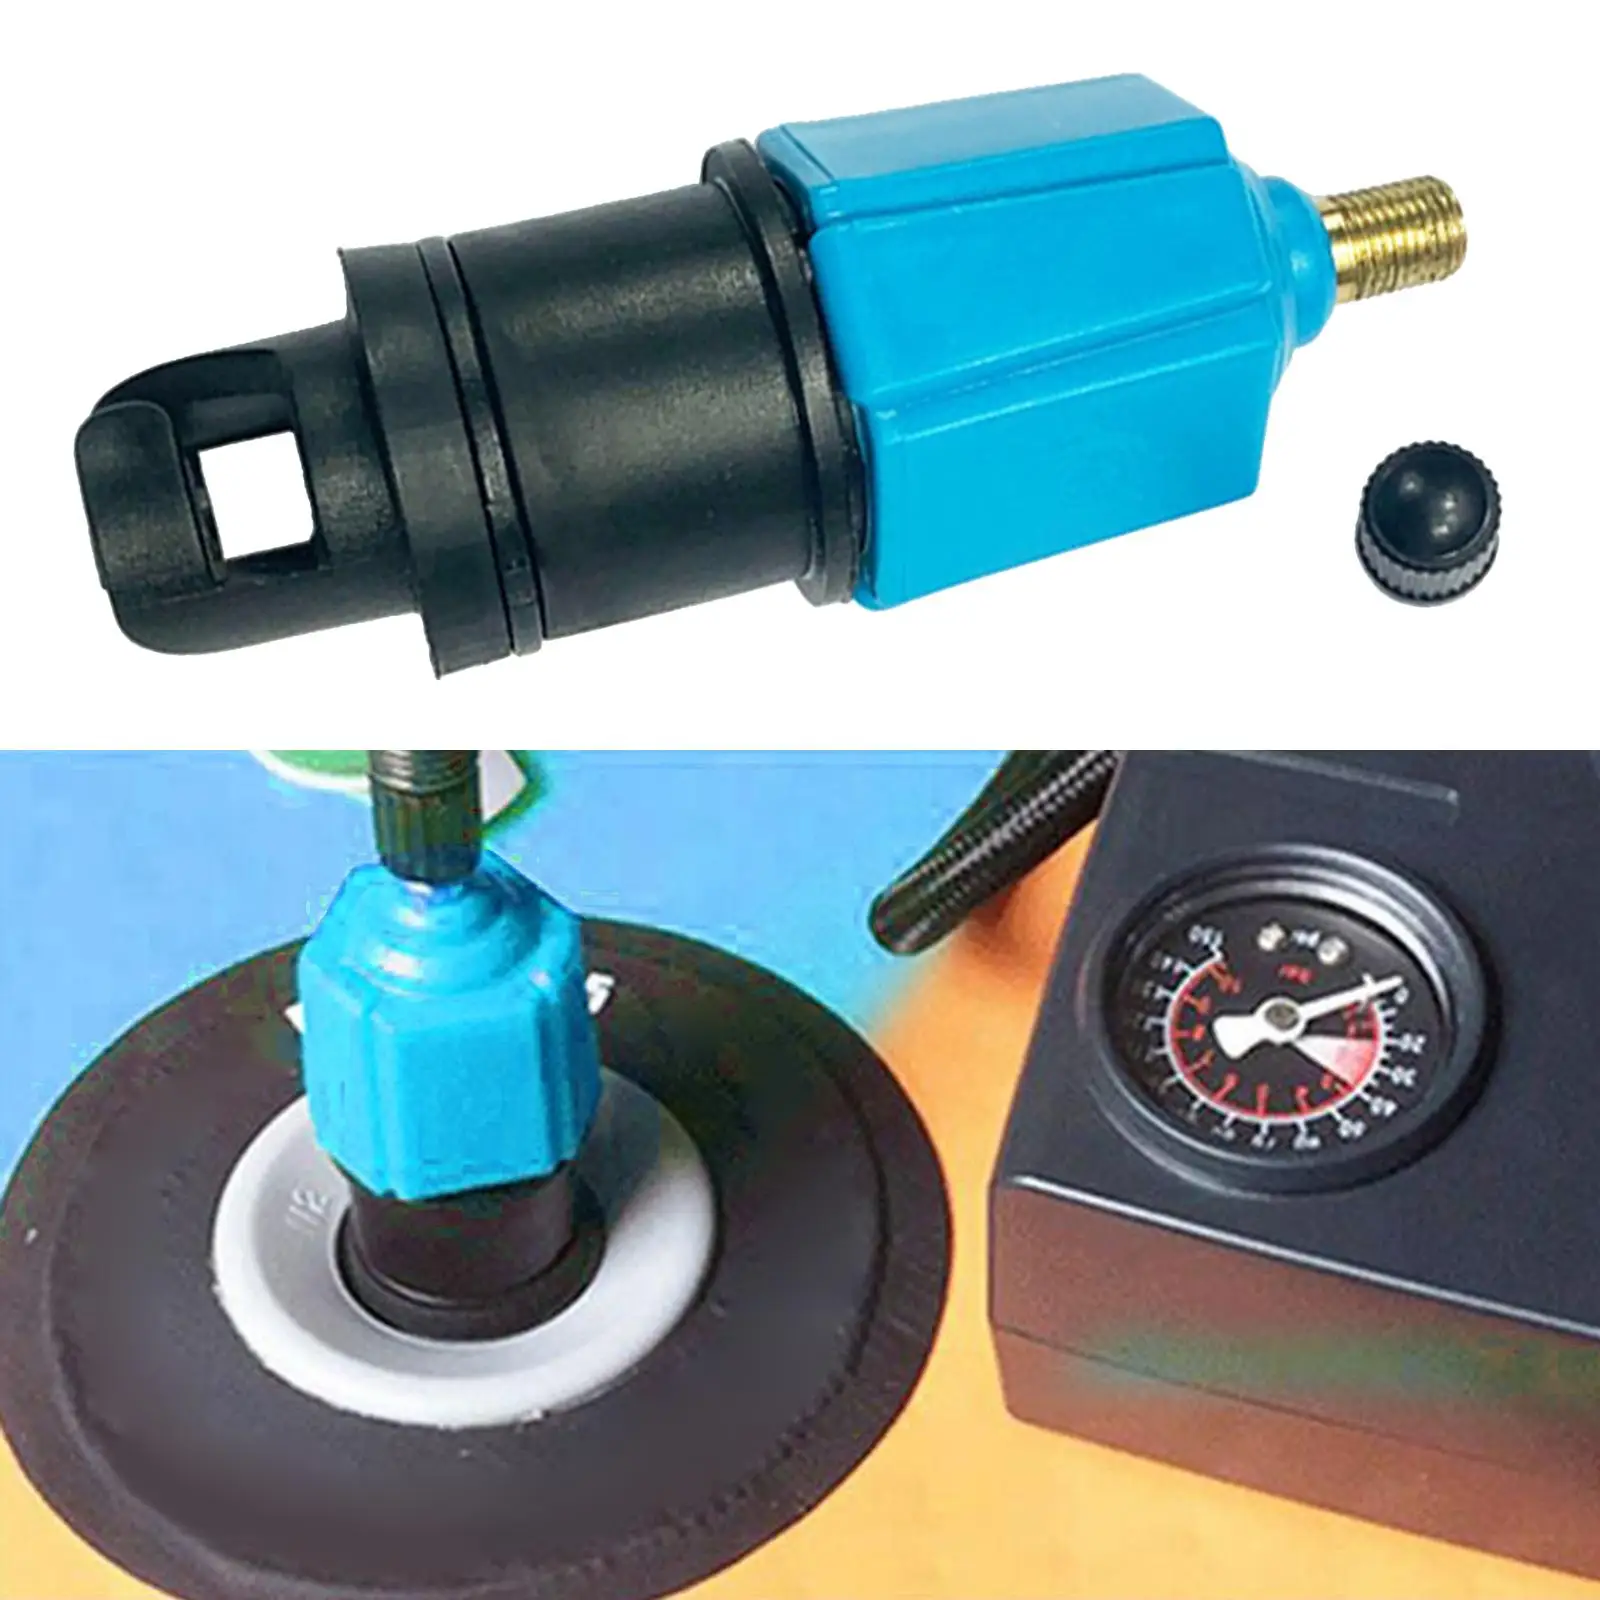  Valve Adaptor Wear-Resistant Pumping Nozzle Inflatable Pump Adapter Pump Valve Adaptor for Kayak Boat Rowing Parts Accessory